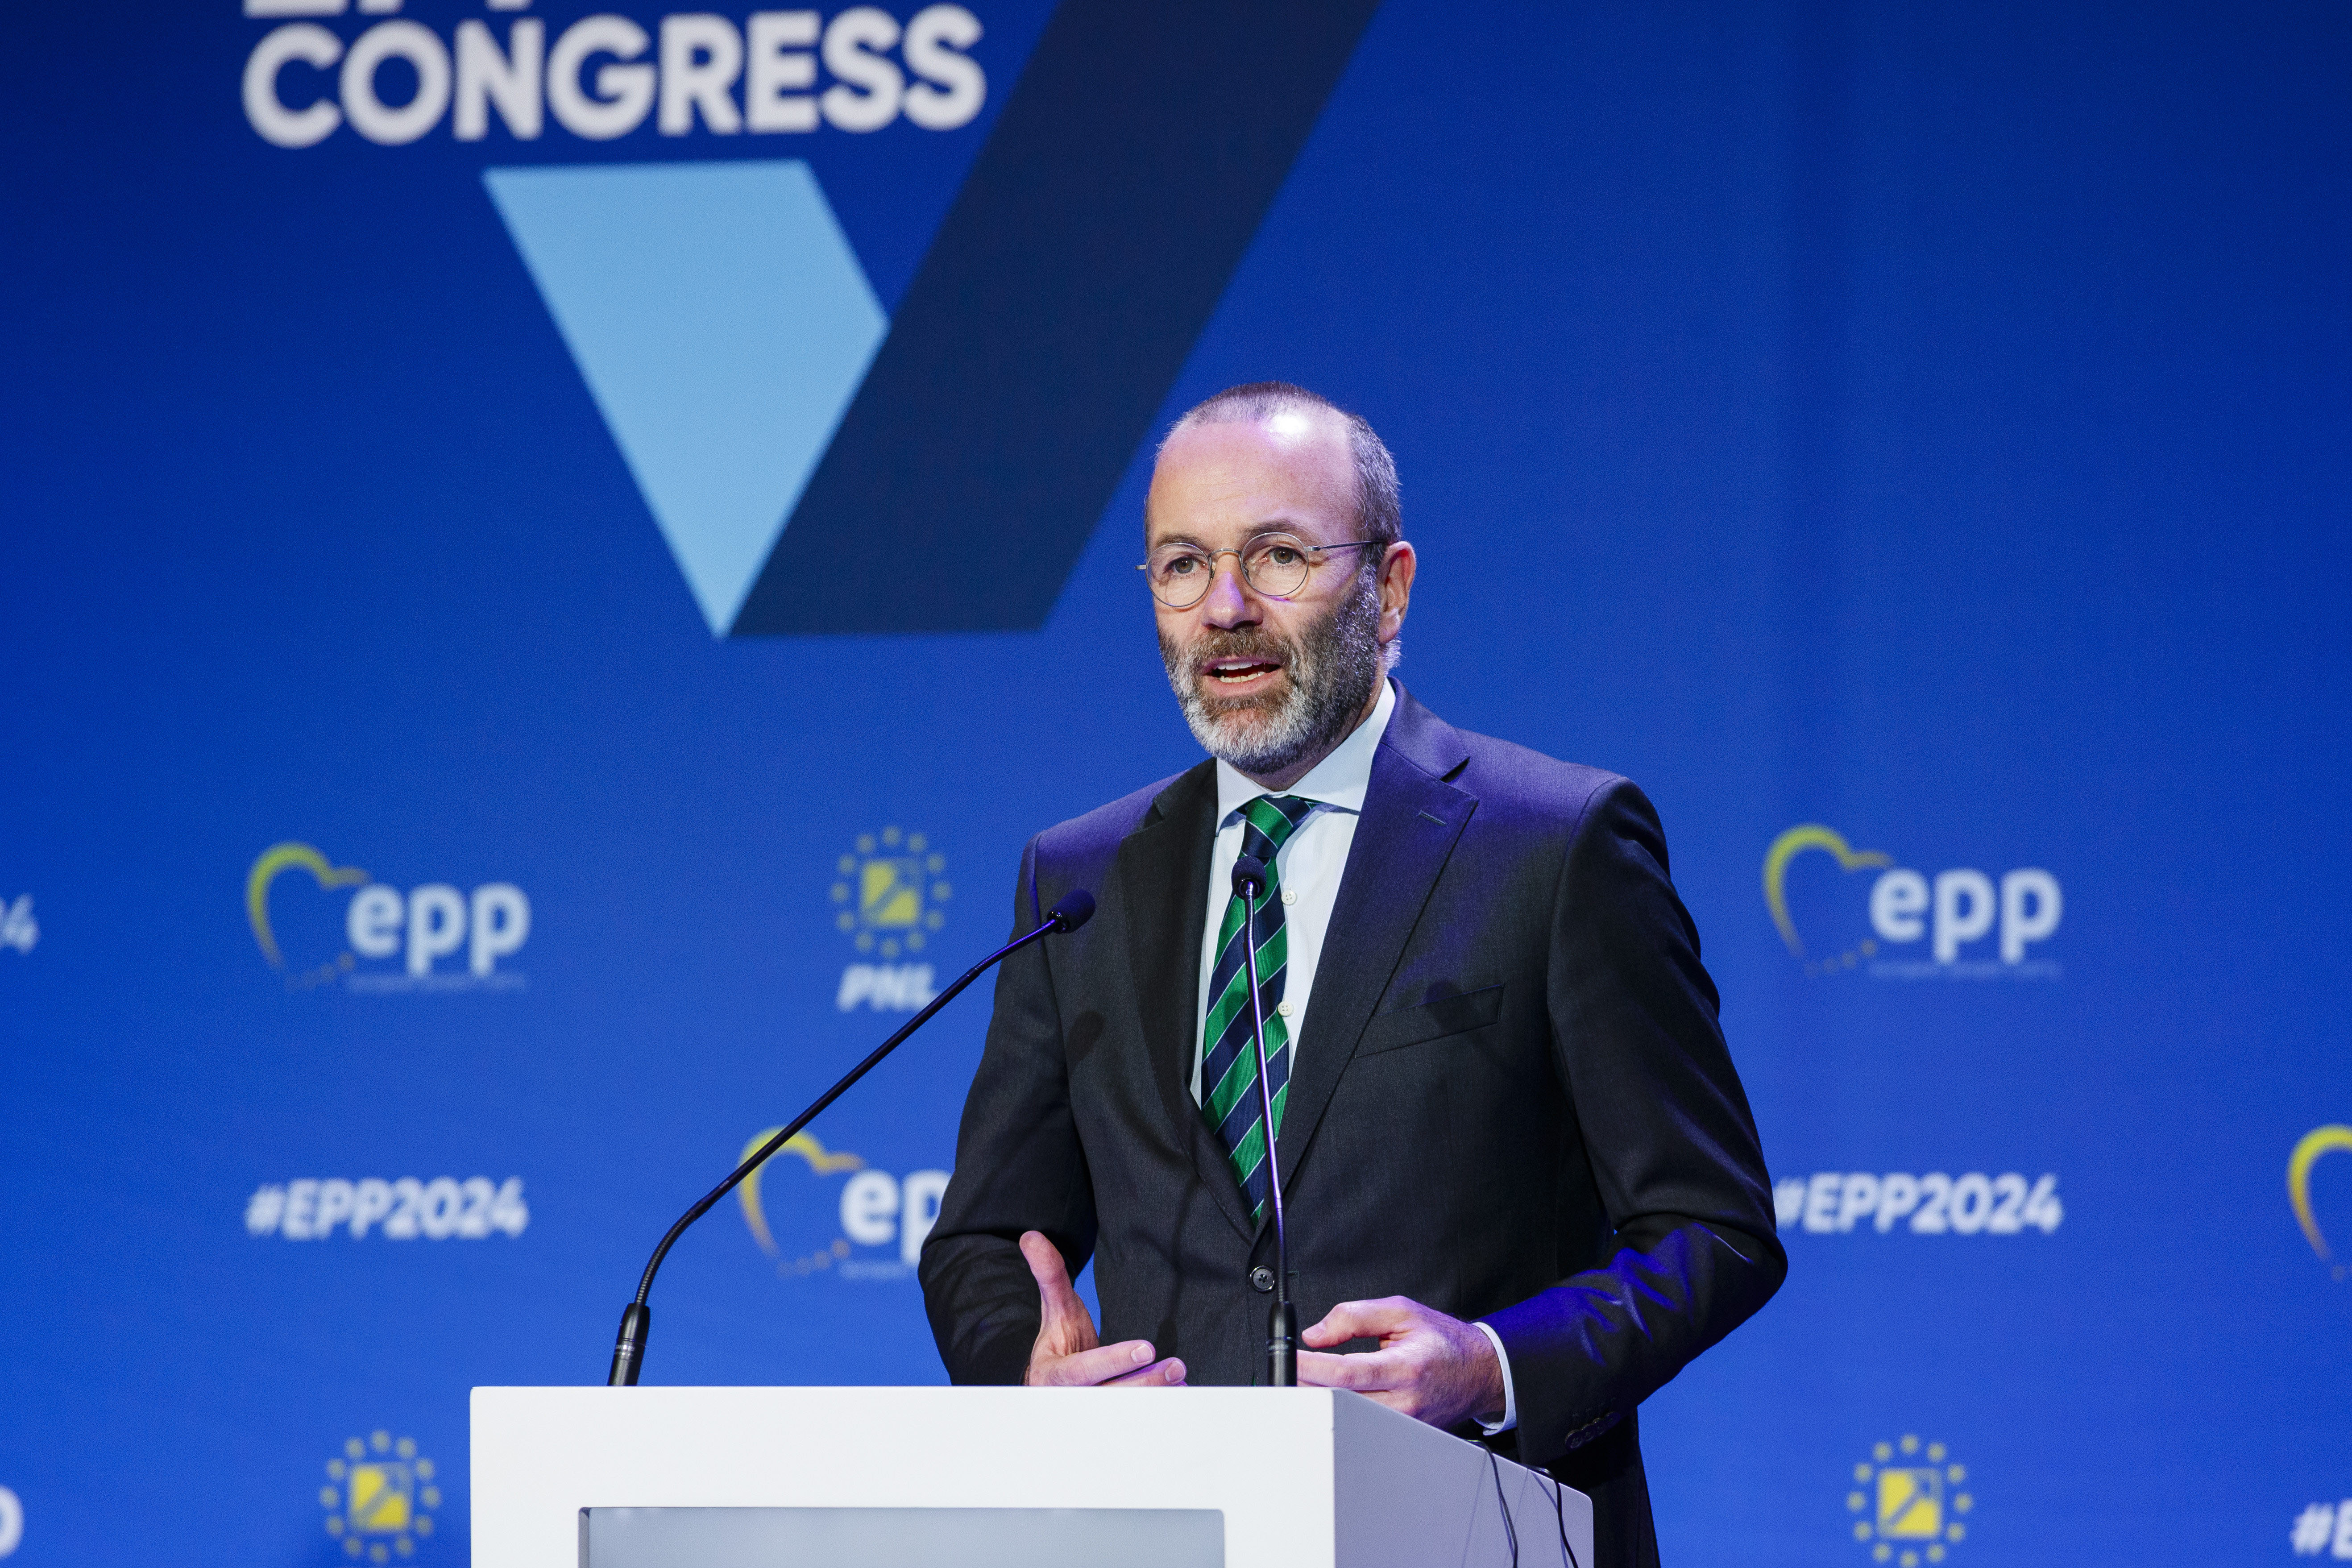 EPP supports Romania’s accession to Schengen, party president says at congress in Bucharest